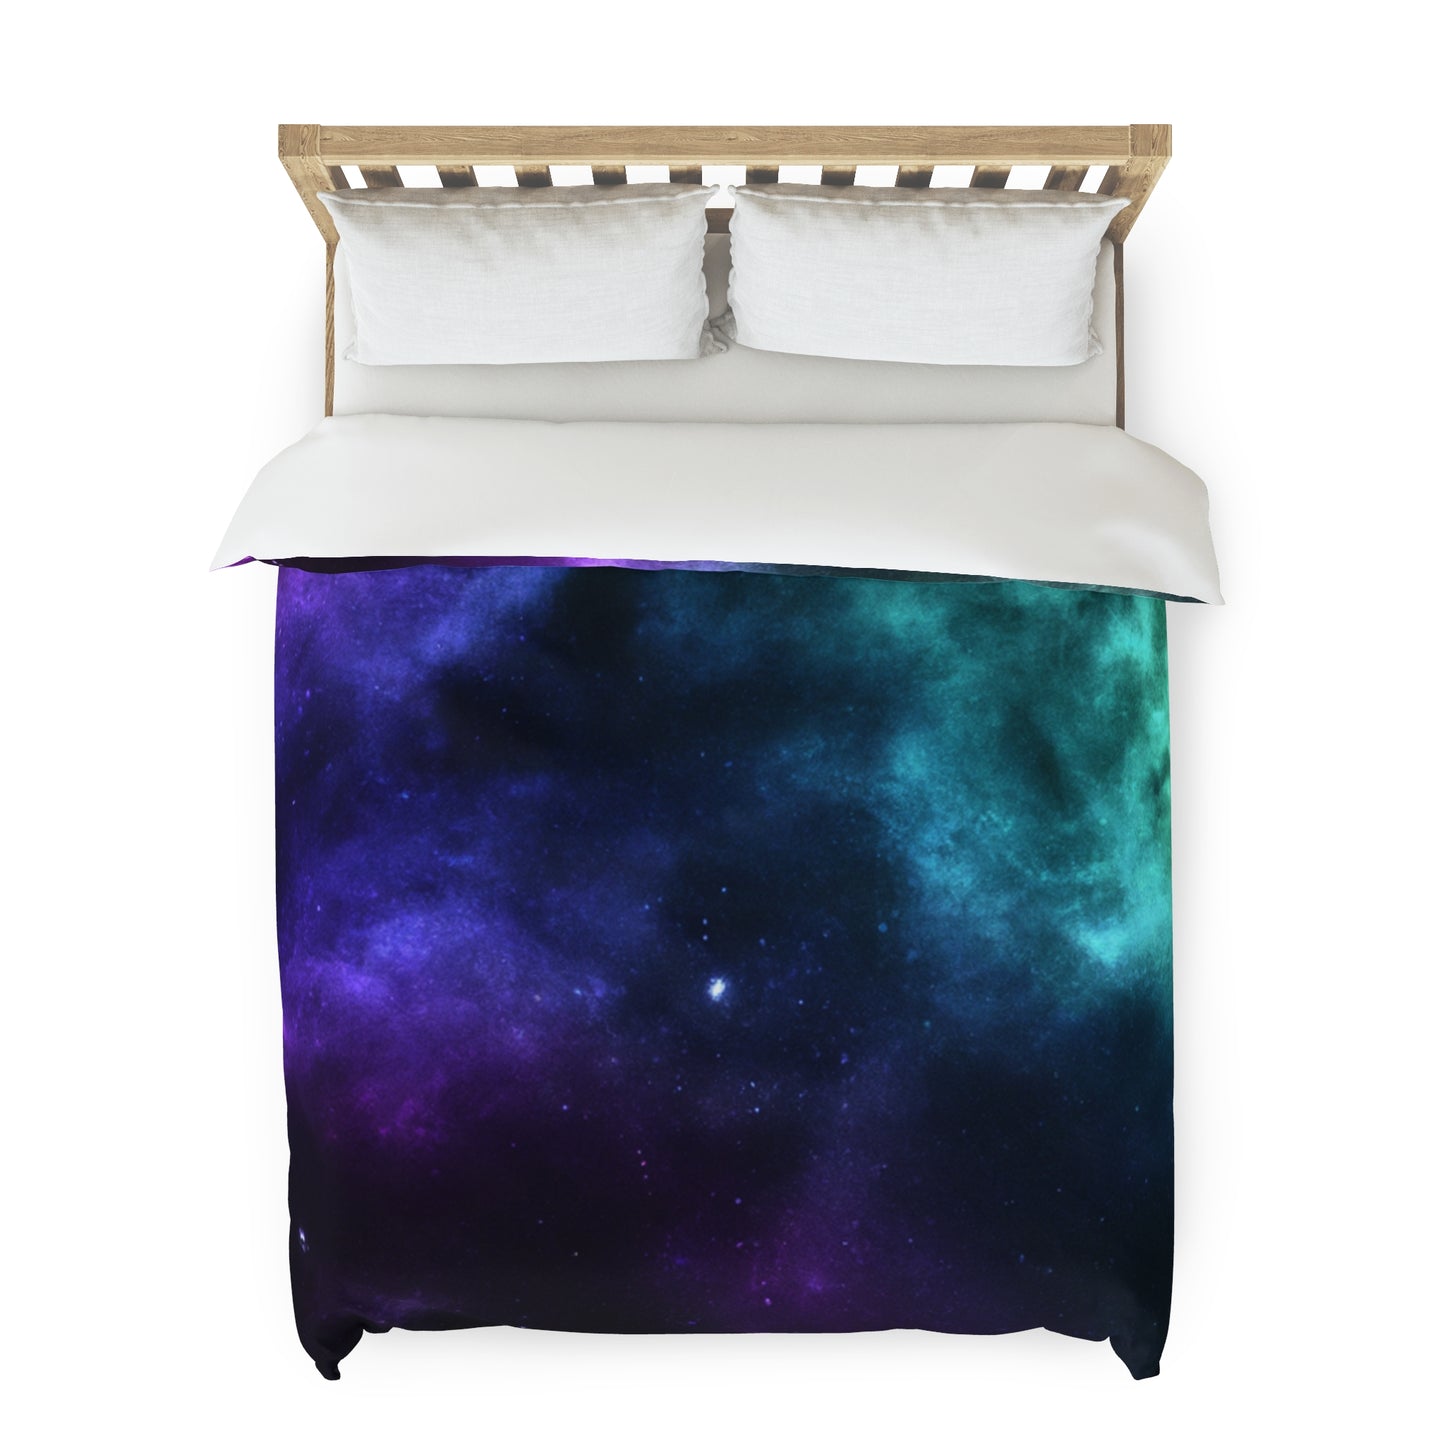 Dreamy Danny - Astronomy Duvet Bed Cover